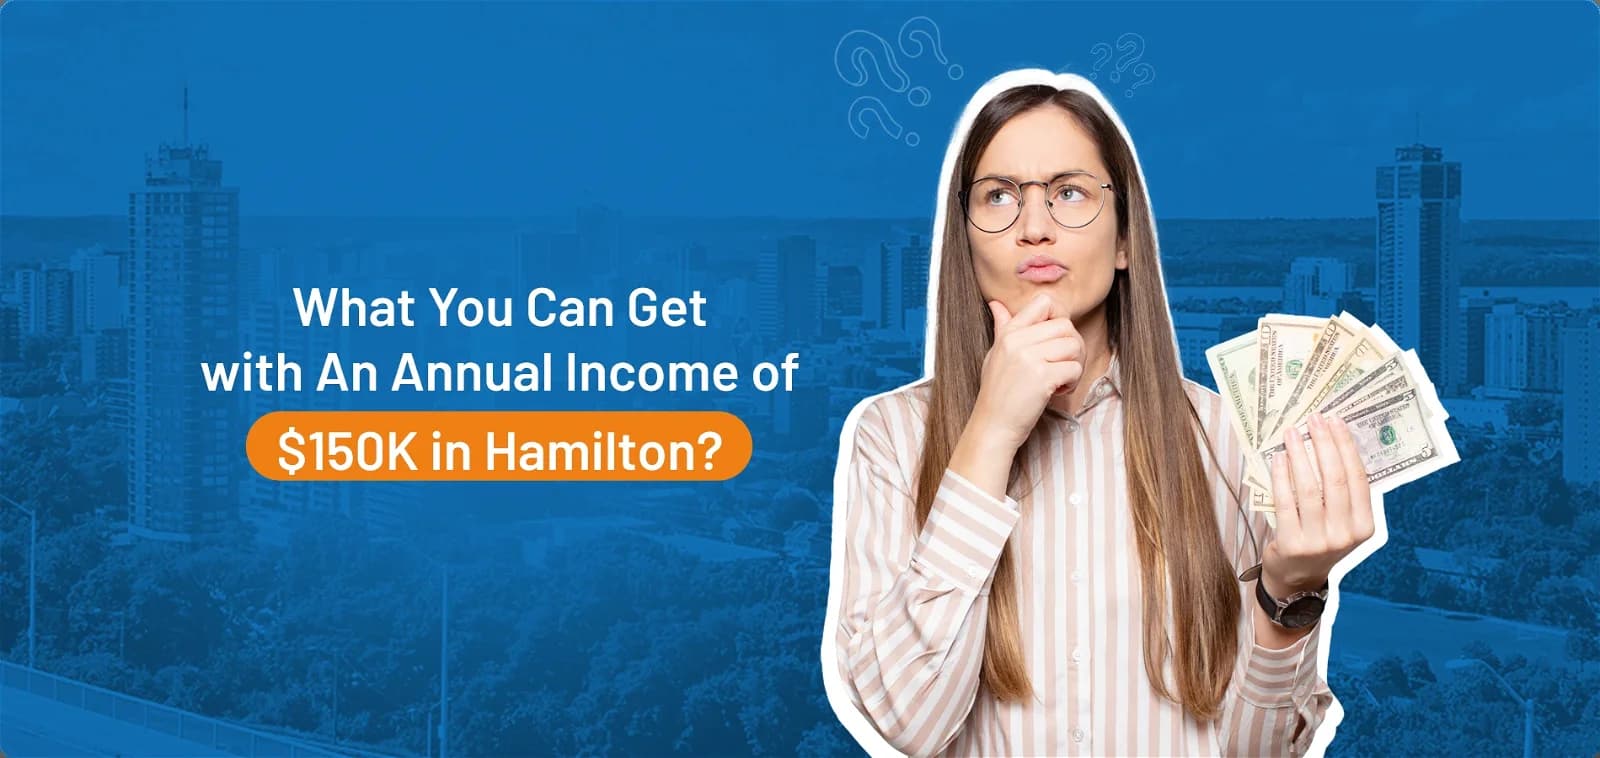 What You Can Get With an Annual Income of $150K in Hamilton?